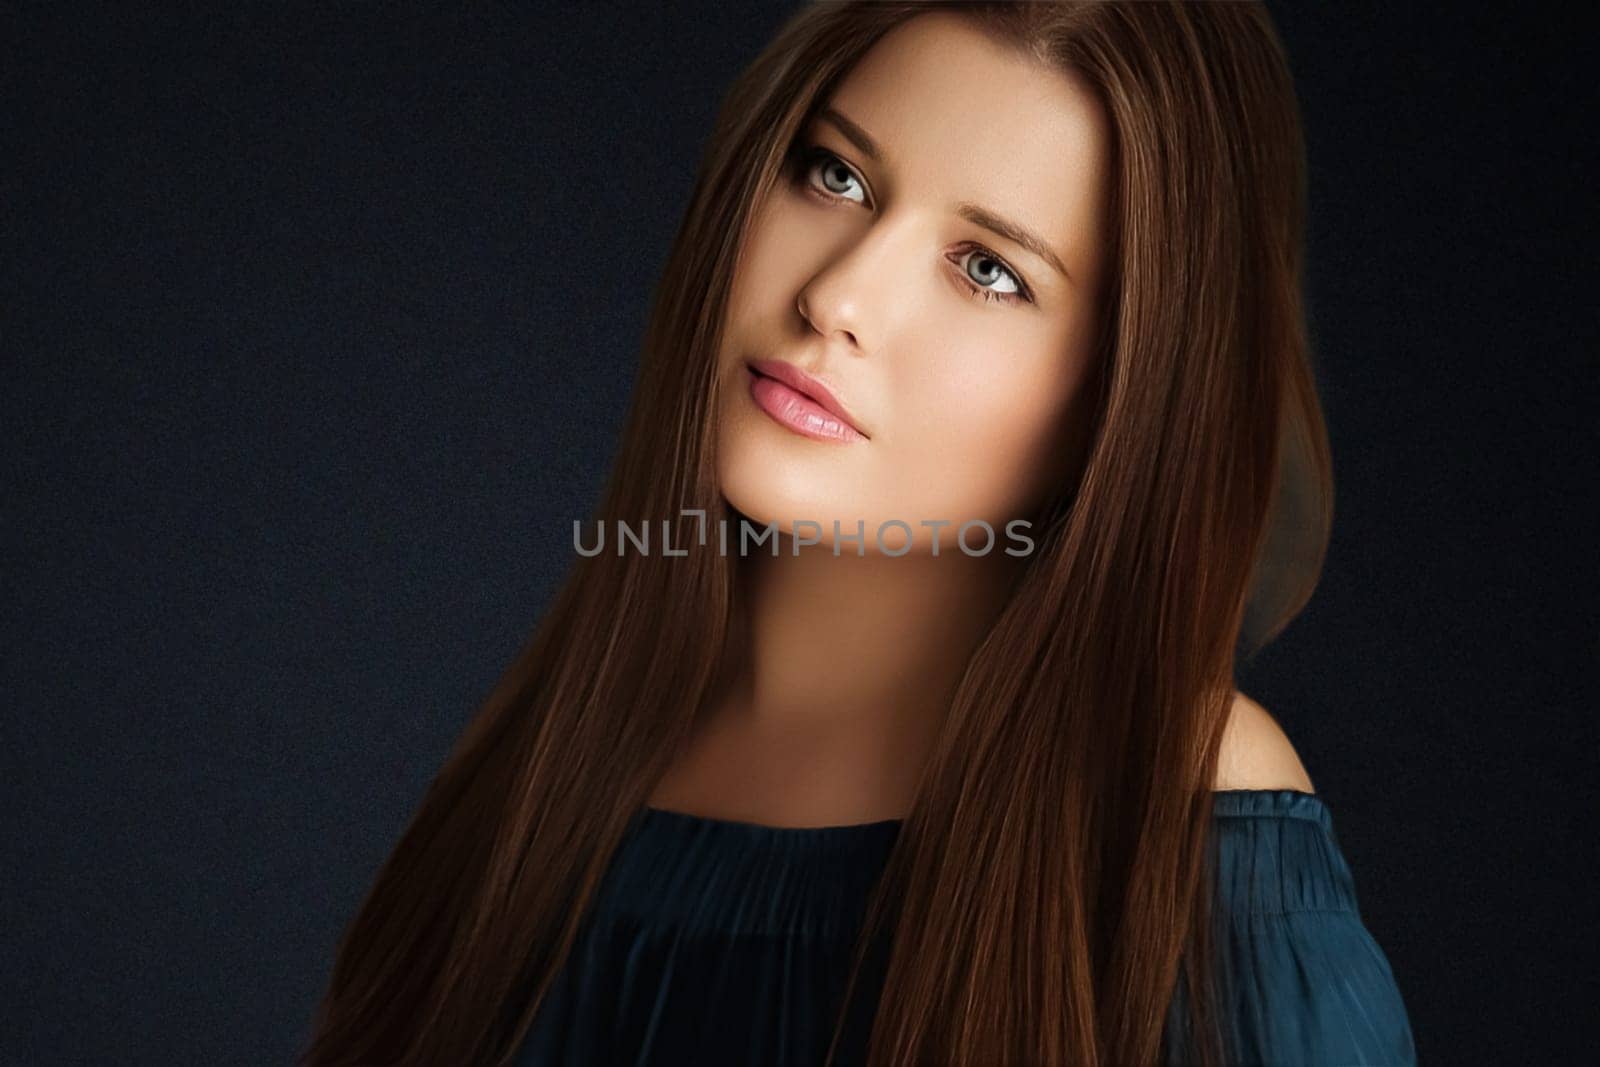 Beauty, makeup and skincare, face portrait of beautiful woman with long hairstyle on black background for luxury cosmetics, wellness or glamour fashion by Anneleven